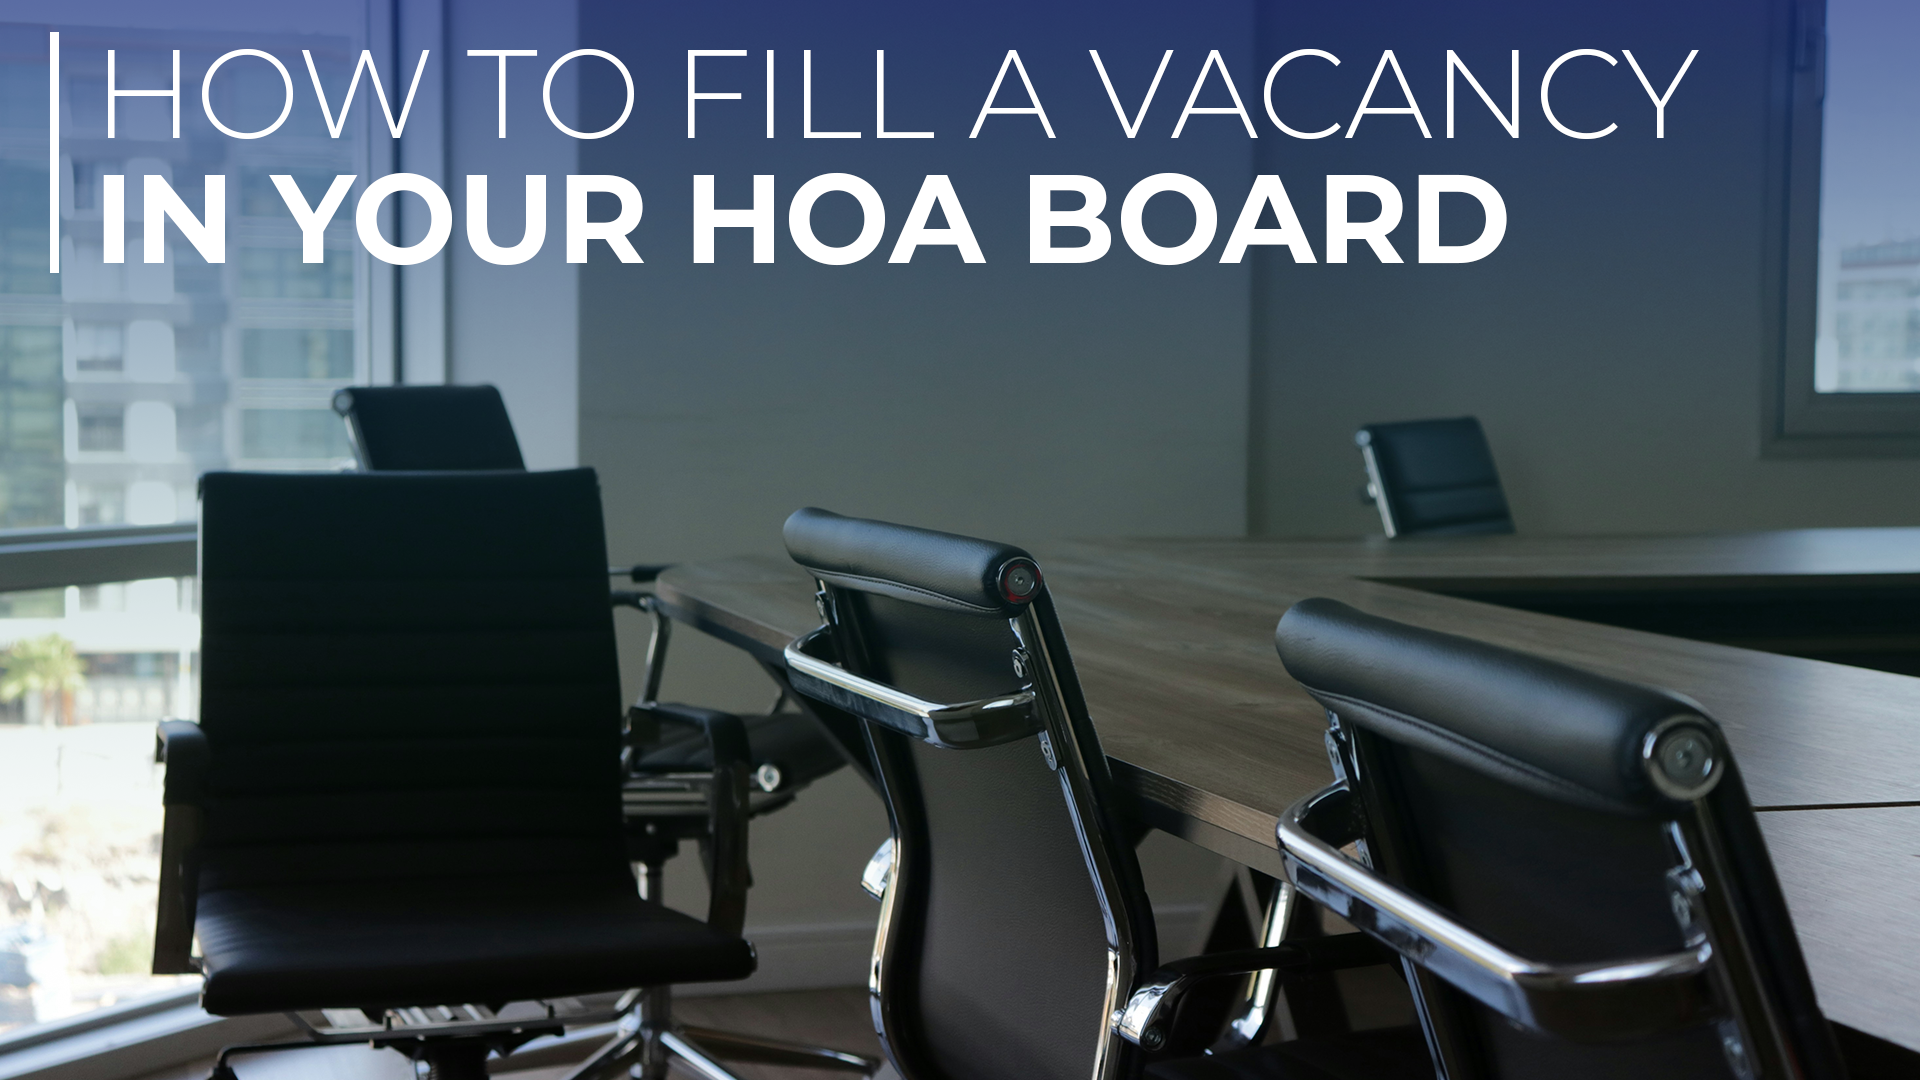 How to Fill a Vacancy on Your HOA Board